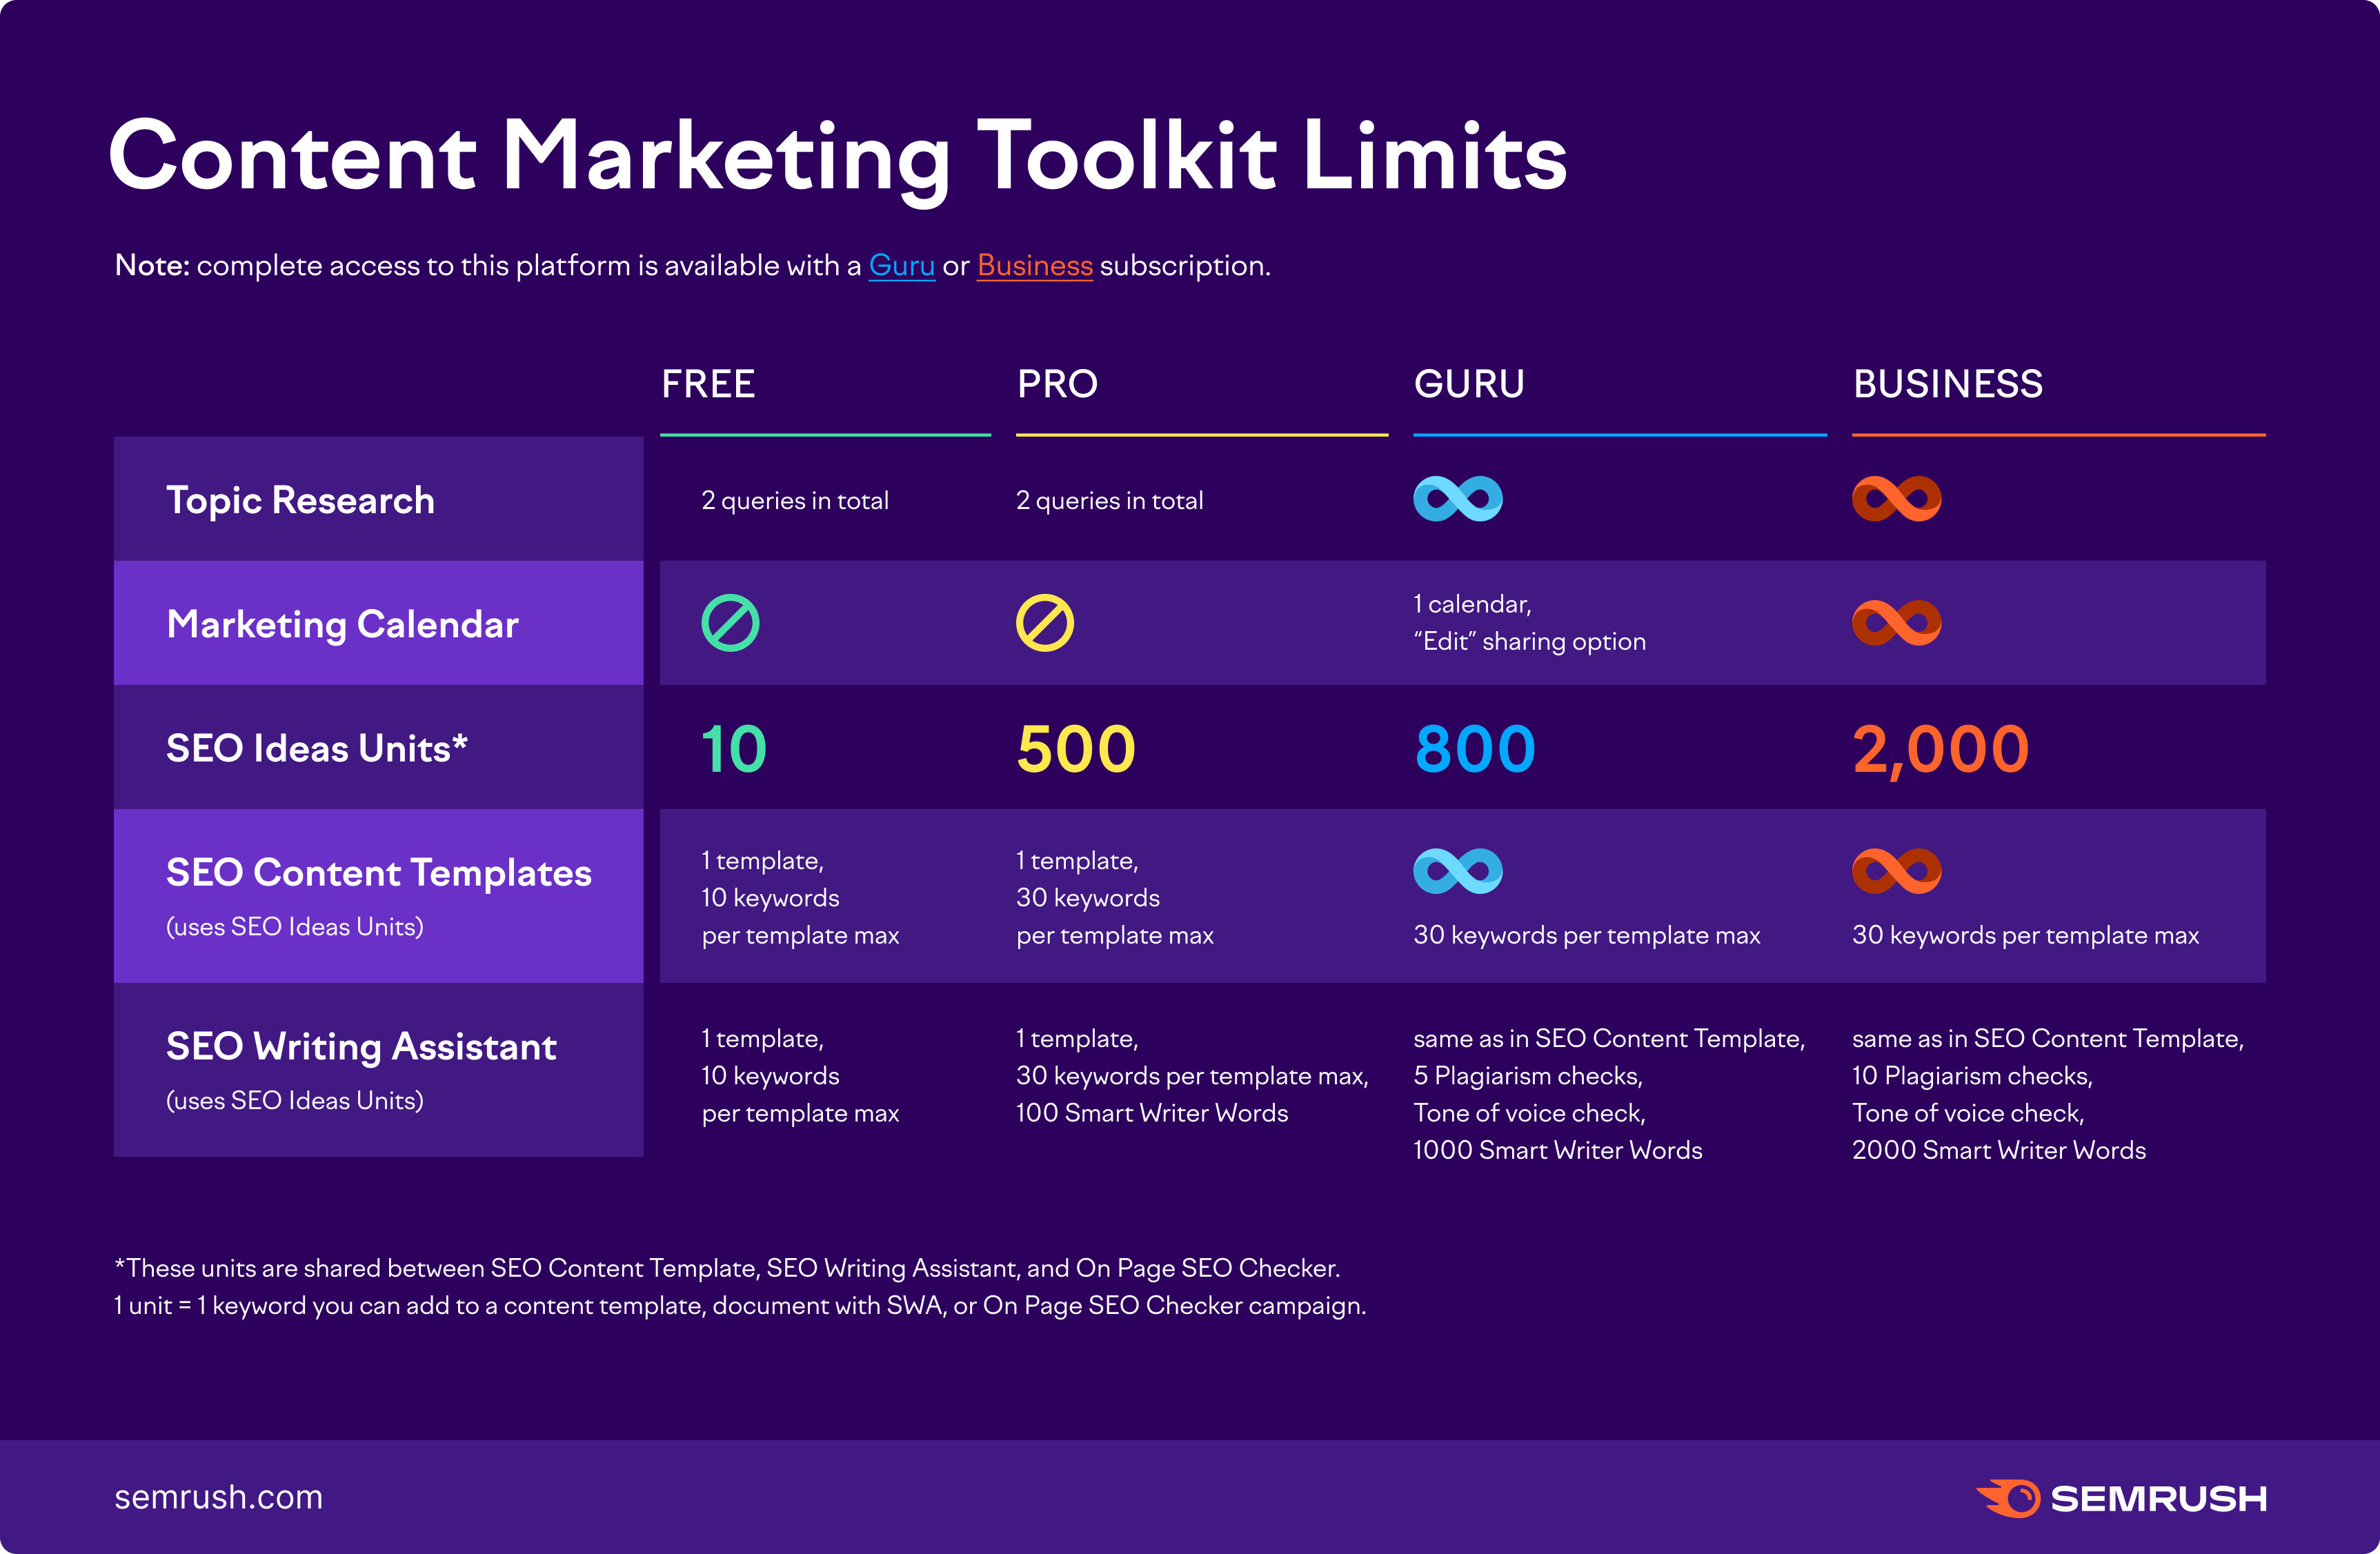 A list of Content Marketing Toolkit limits, provided for Free, Pro, Guru, and Business subscription plans. The information is provided for the following tools: Topic Research, Marketing Calendar, SEO Content Templates, and SEO Writing Assistant. The information is matching the text below the screenshot and provides a bit more additional information like the number of keywords in SEO Content Templates or SEO Writing Assistant. 